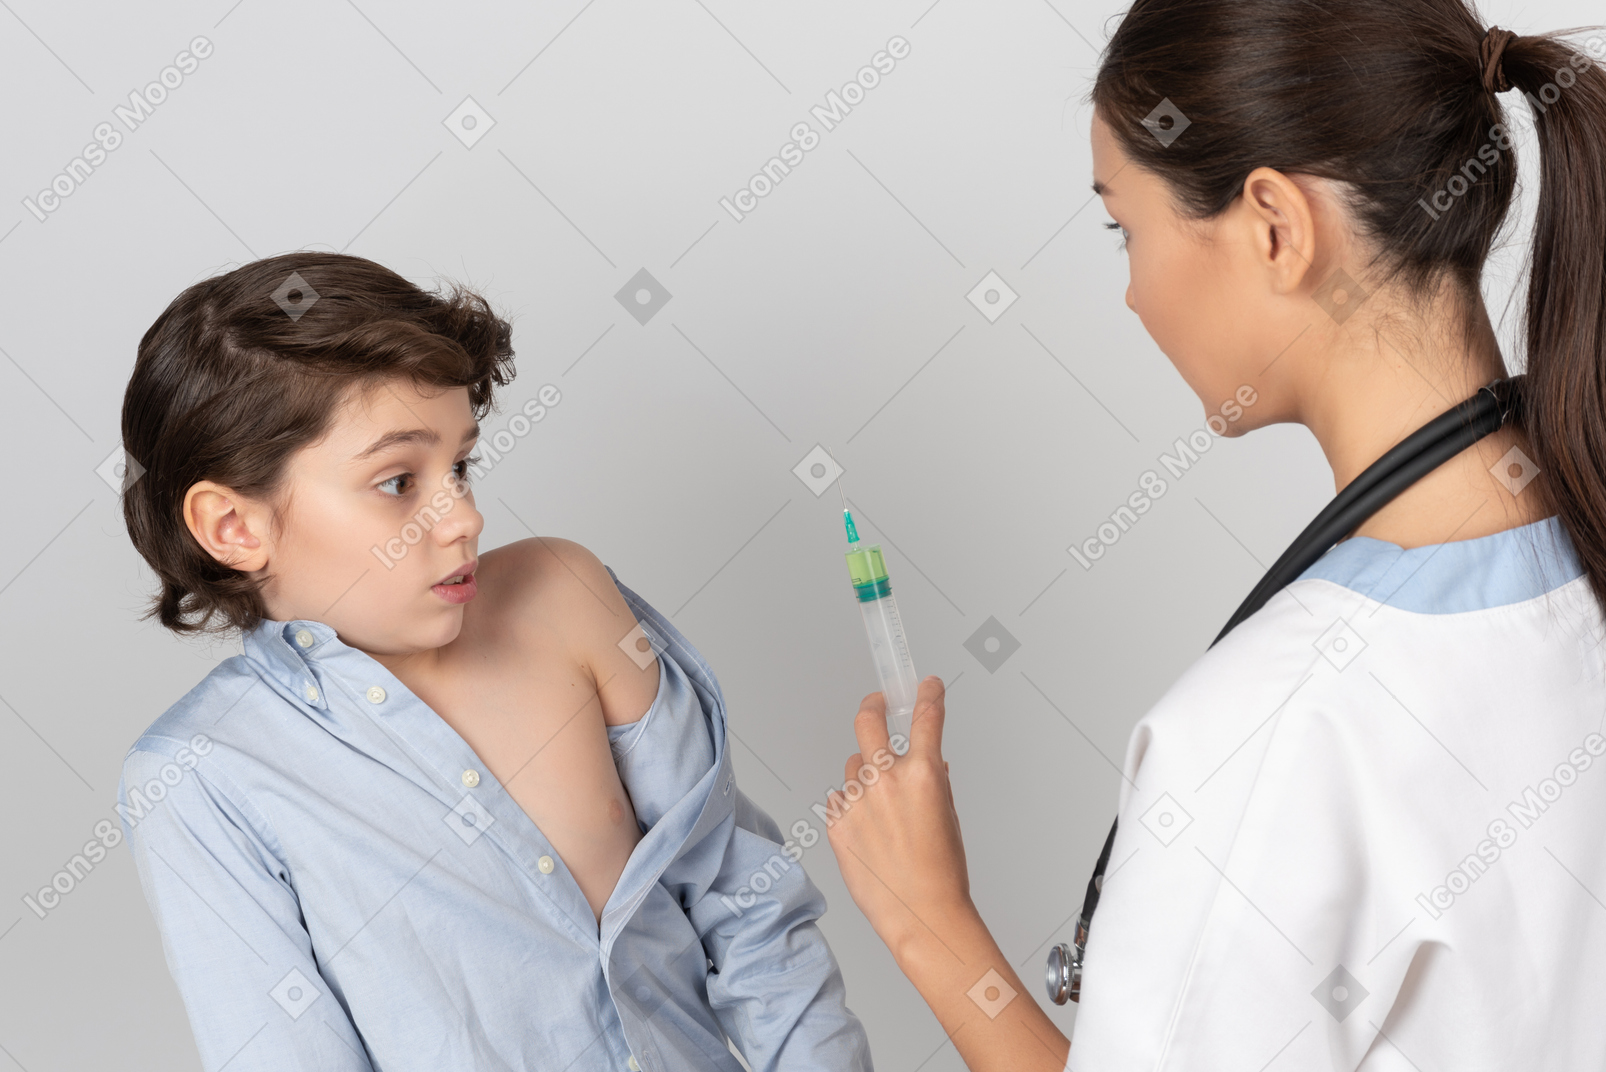 Is this injection really needed?